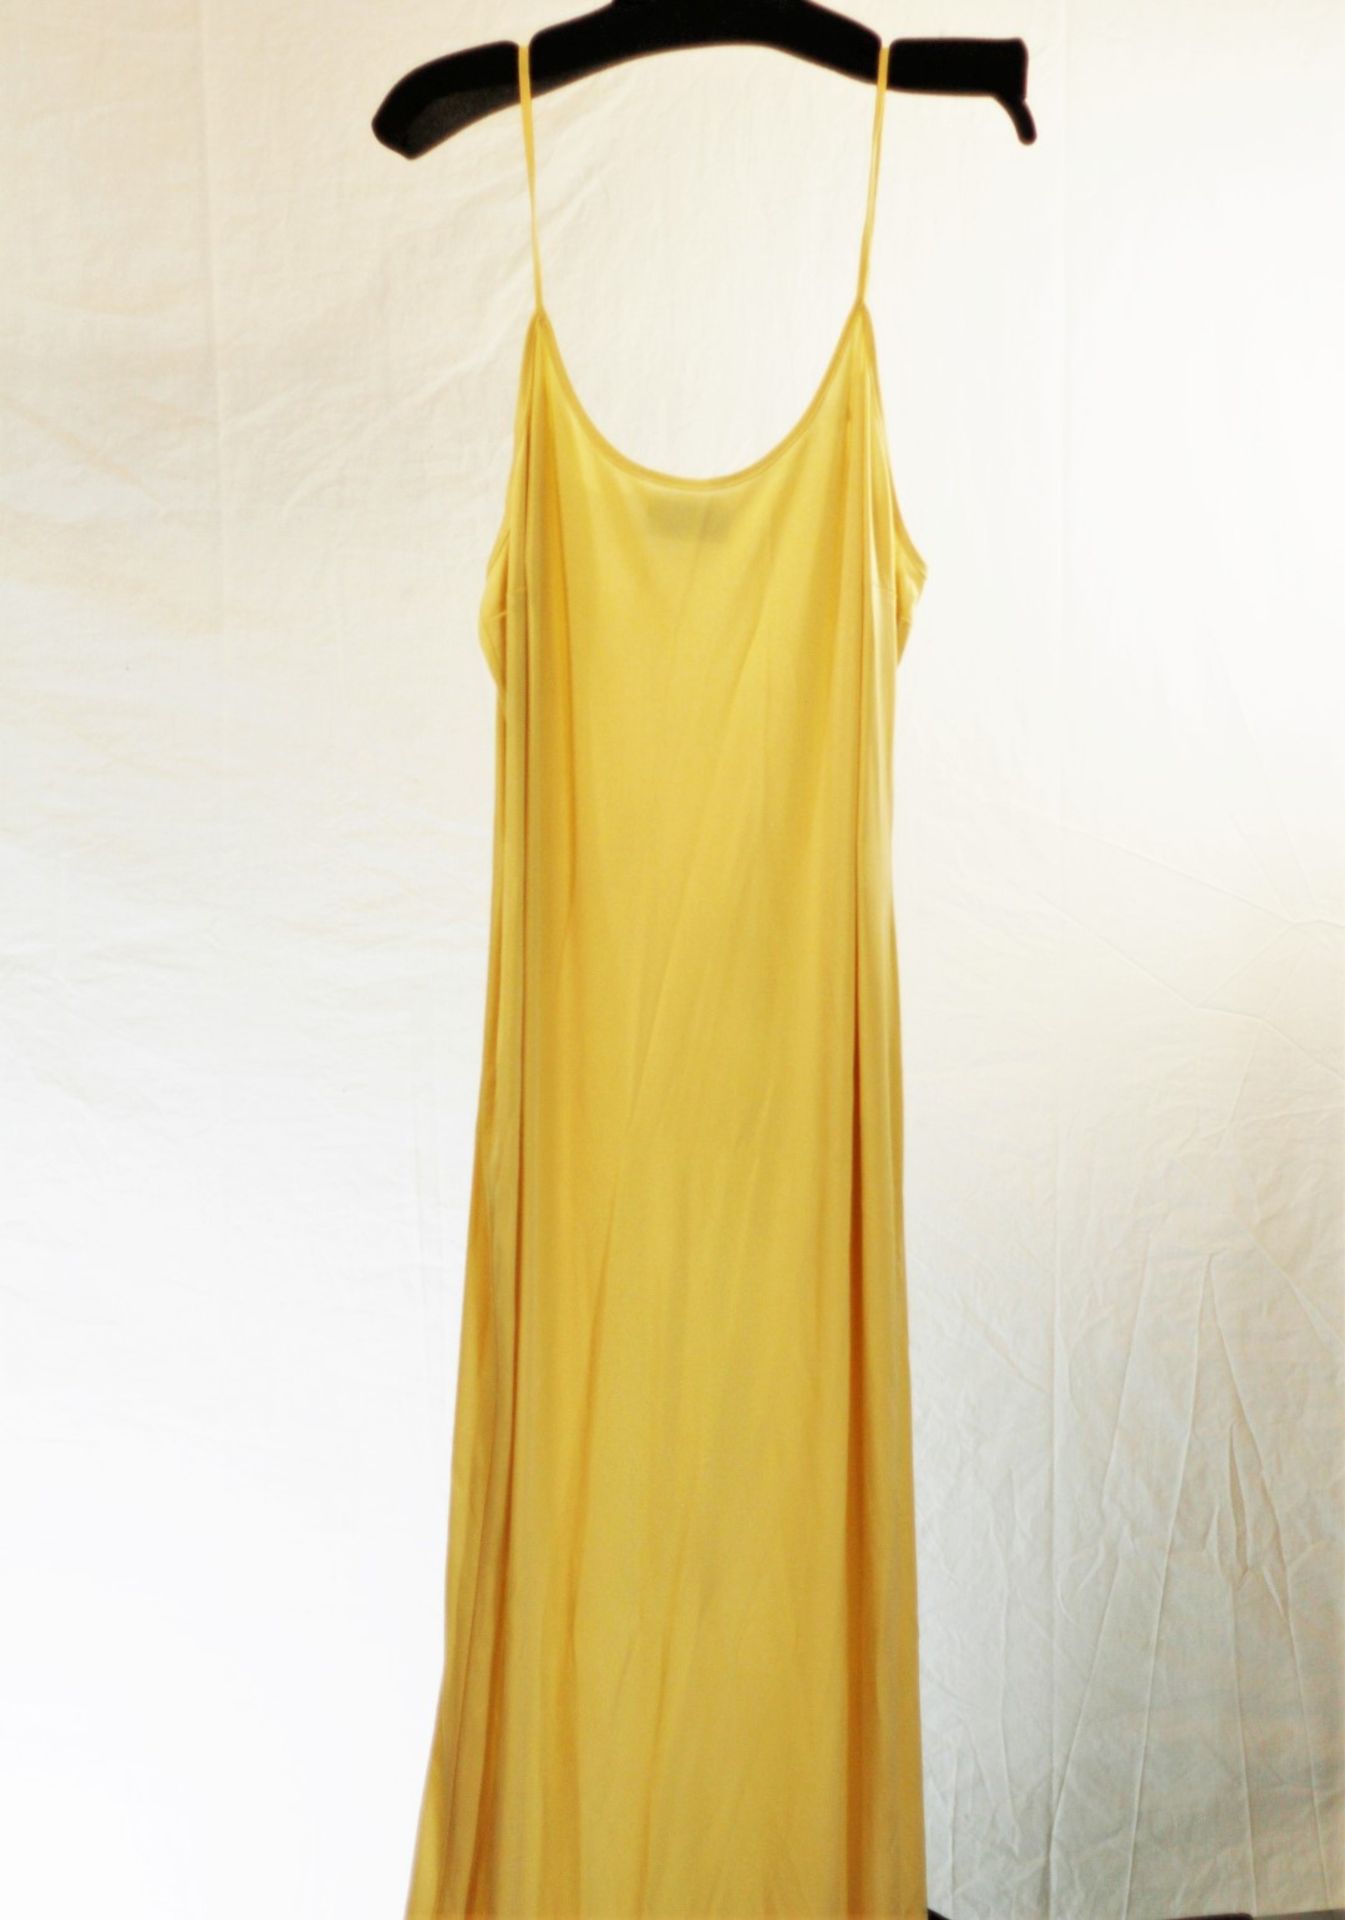 1 x Fendi Champagne Slip Dress - Size: XL - Material: Acetate - From a High End Clothing Boutique